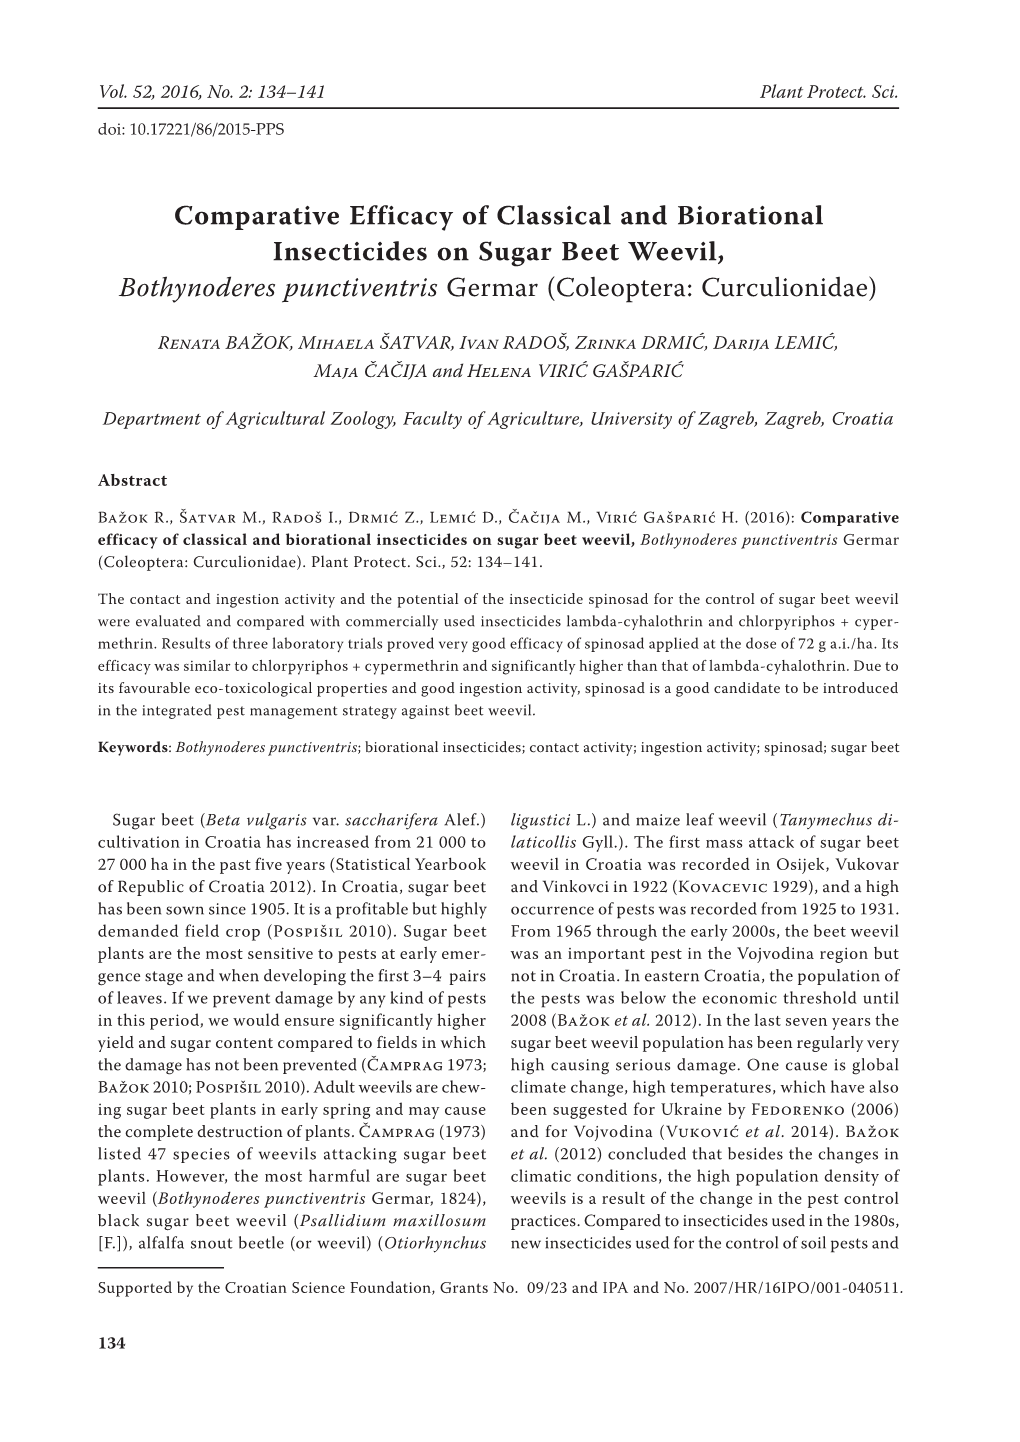 Comparative Efficacy of Classical and Biorational Insecticides on Sugar Beet Weevil, Bothynoderes Punctiventris Germar (Coleoptera: Curculionidae)